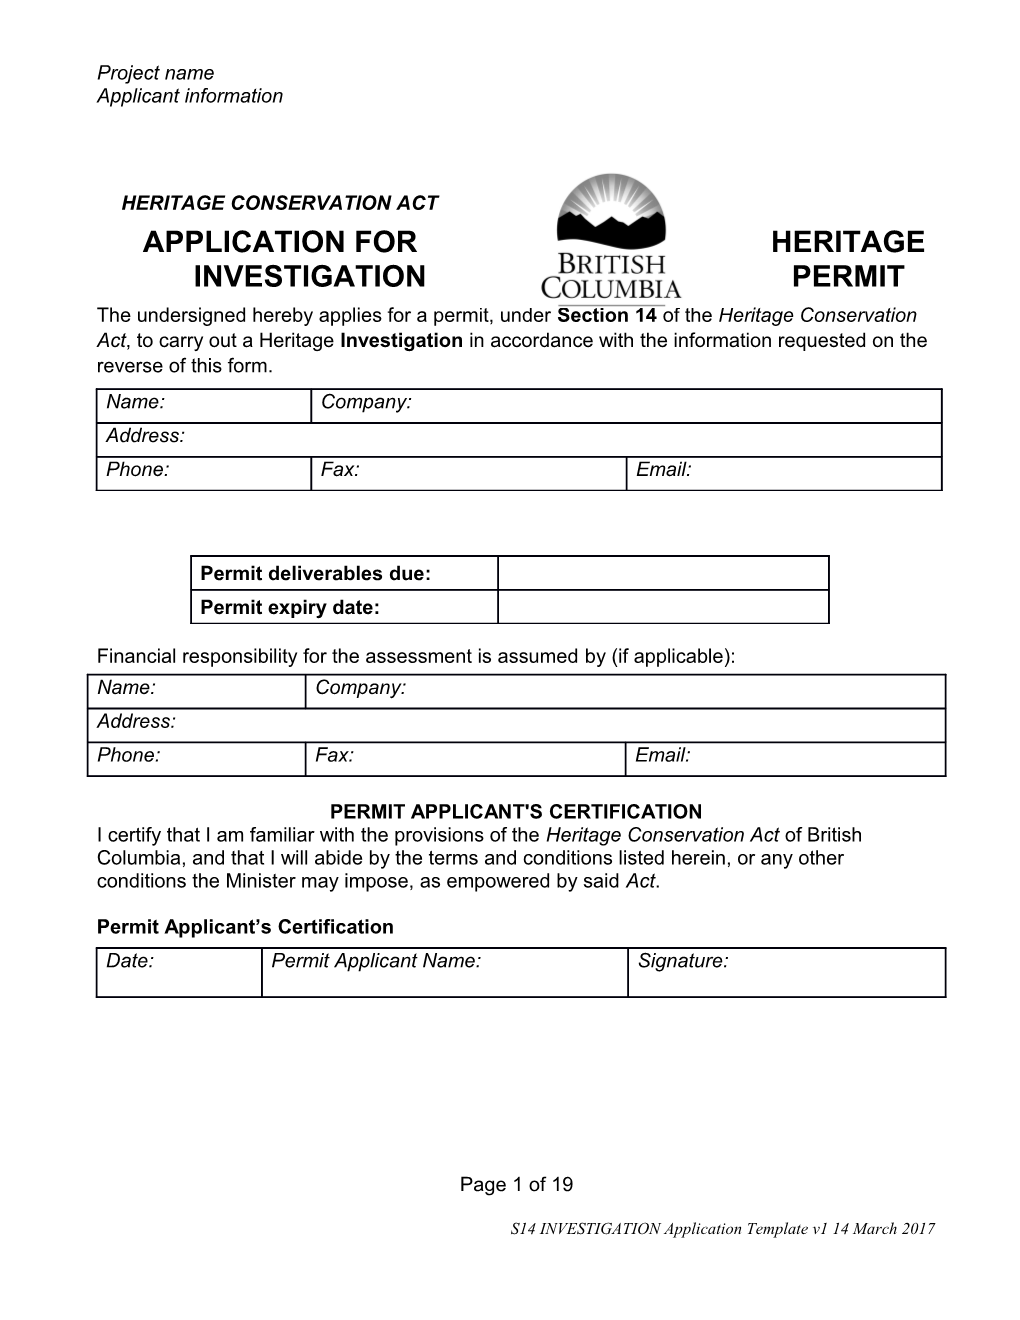 Application for Heritage Investigation Permit